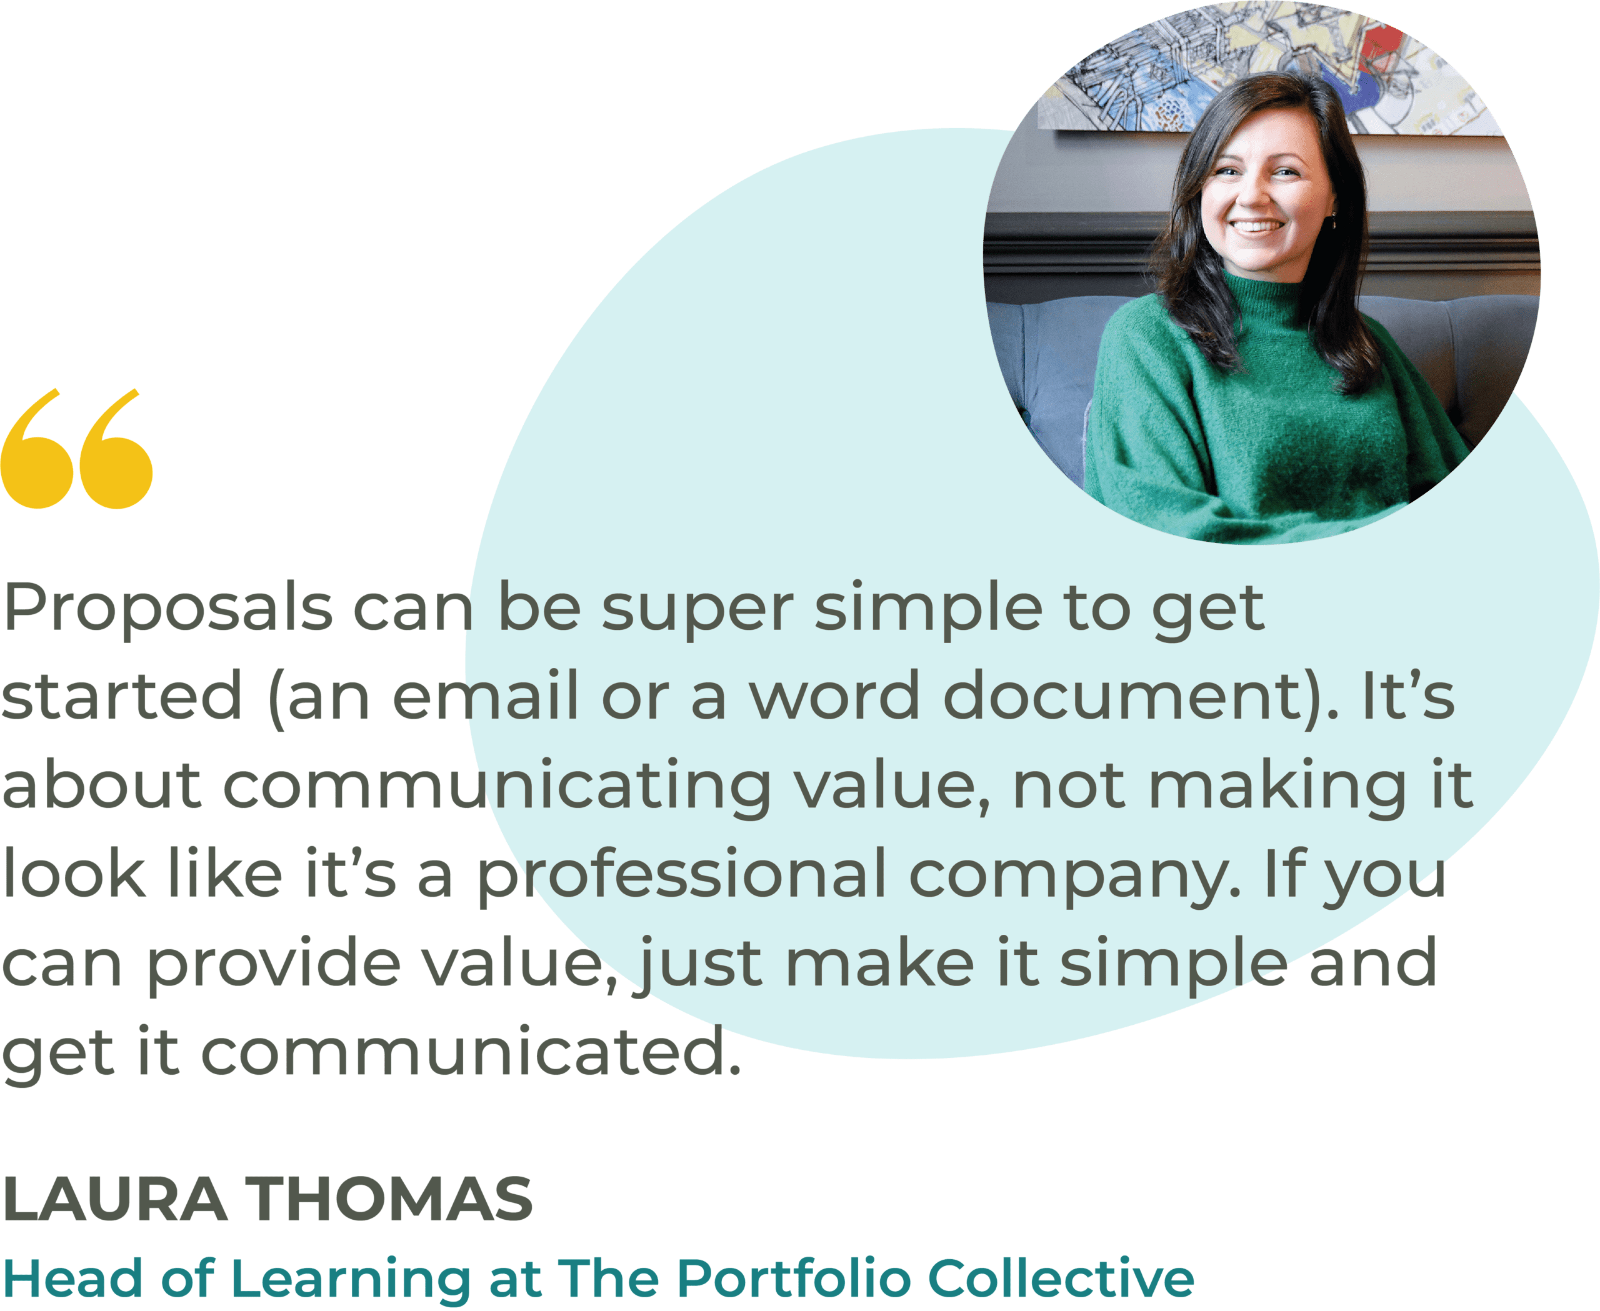 “Proposals can be super simple to get started (an email or a word document). It’s about communicating value, not making it look like it’s a professional company. If you can provide value, just make it simple and get it communicated.” Laura Thomas, Head of Learning at The Portfolio Collective